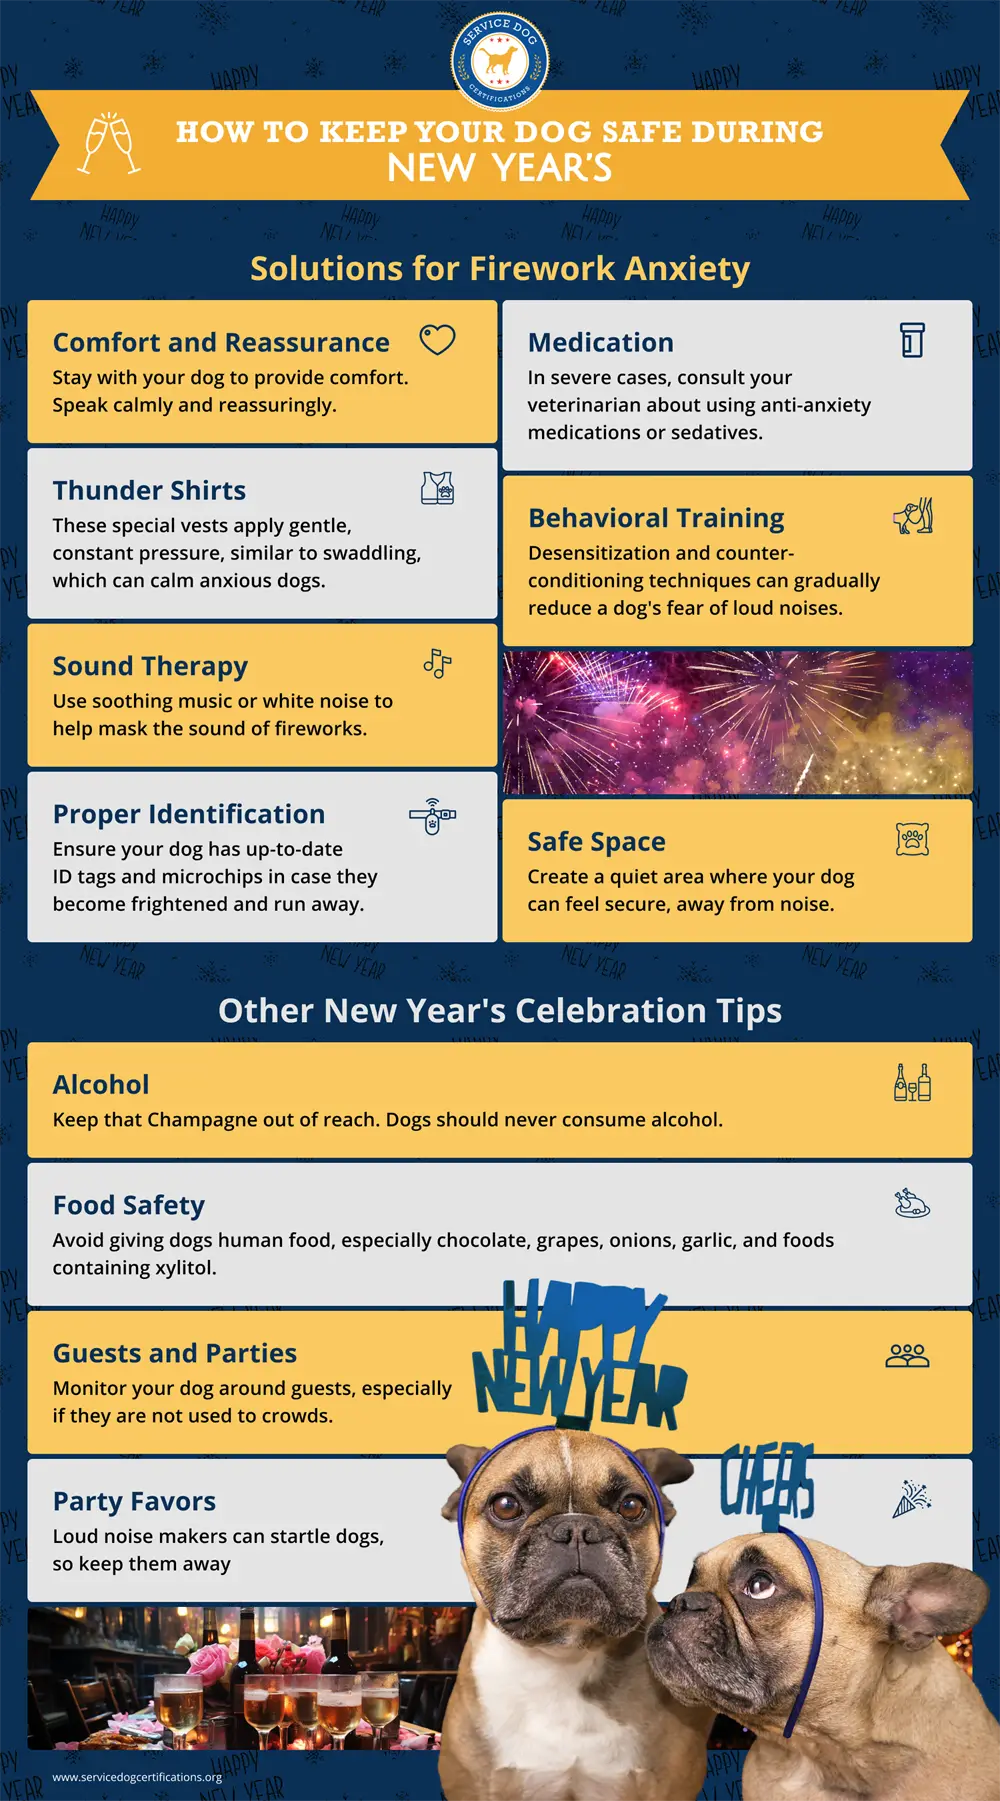 How to keep your dog safe during New Years - Infographic